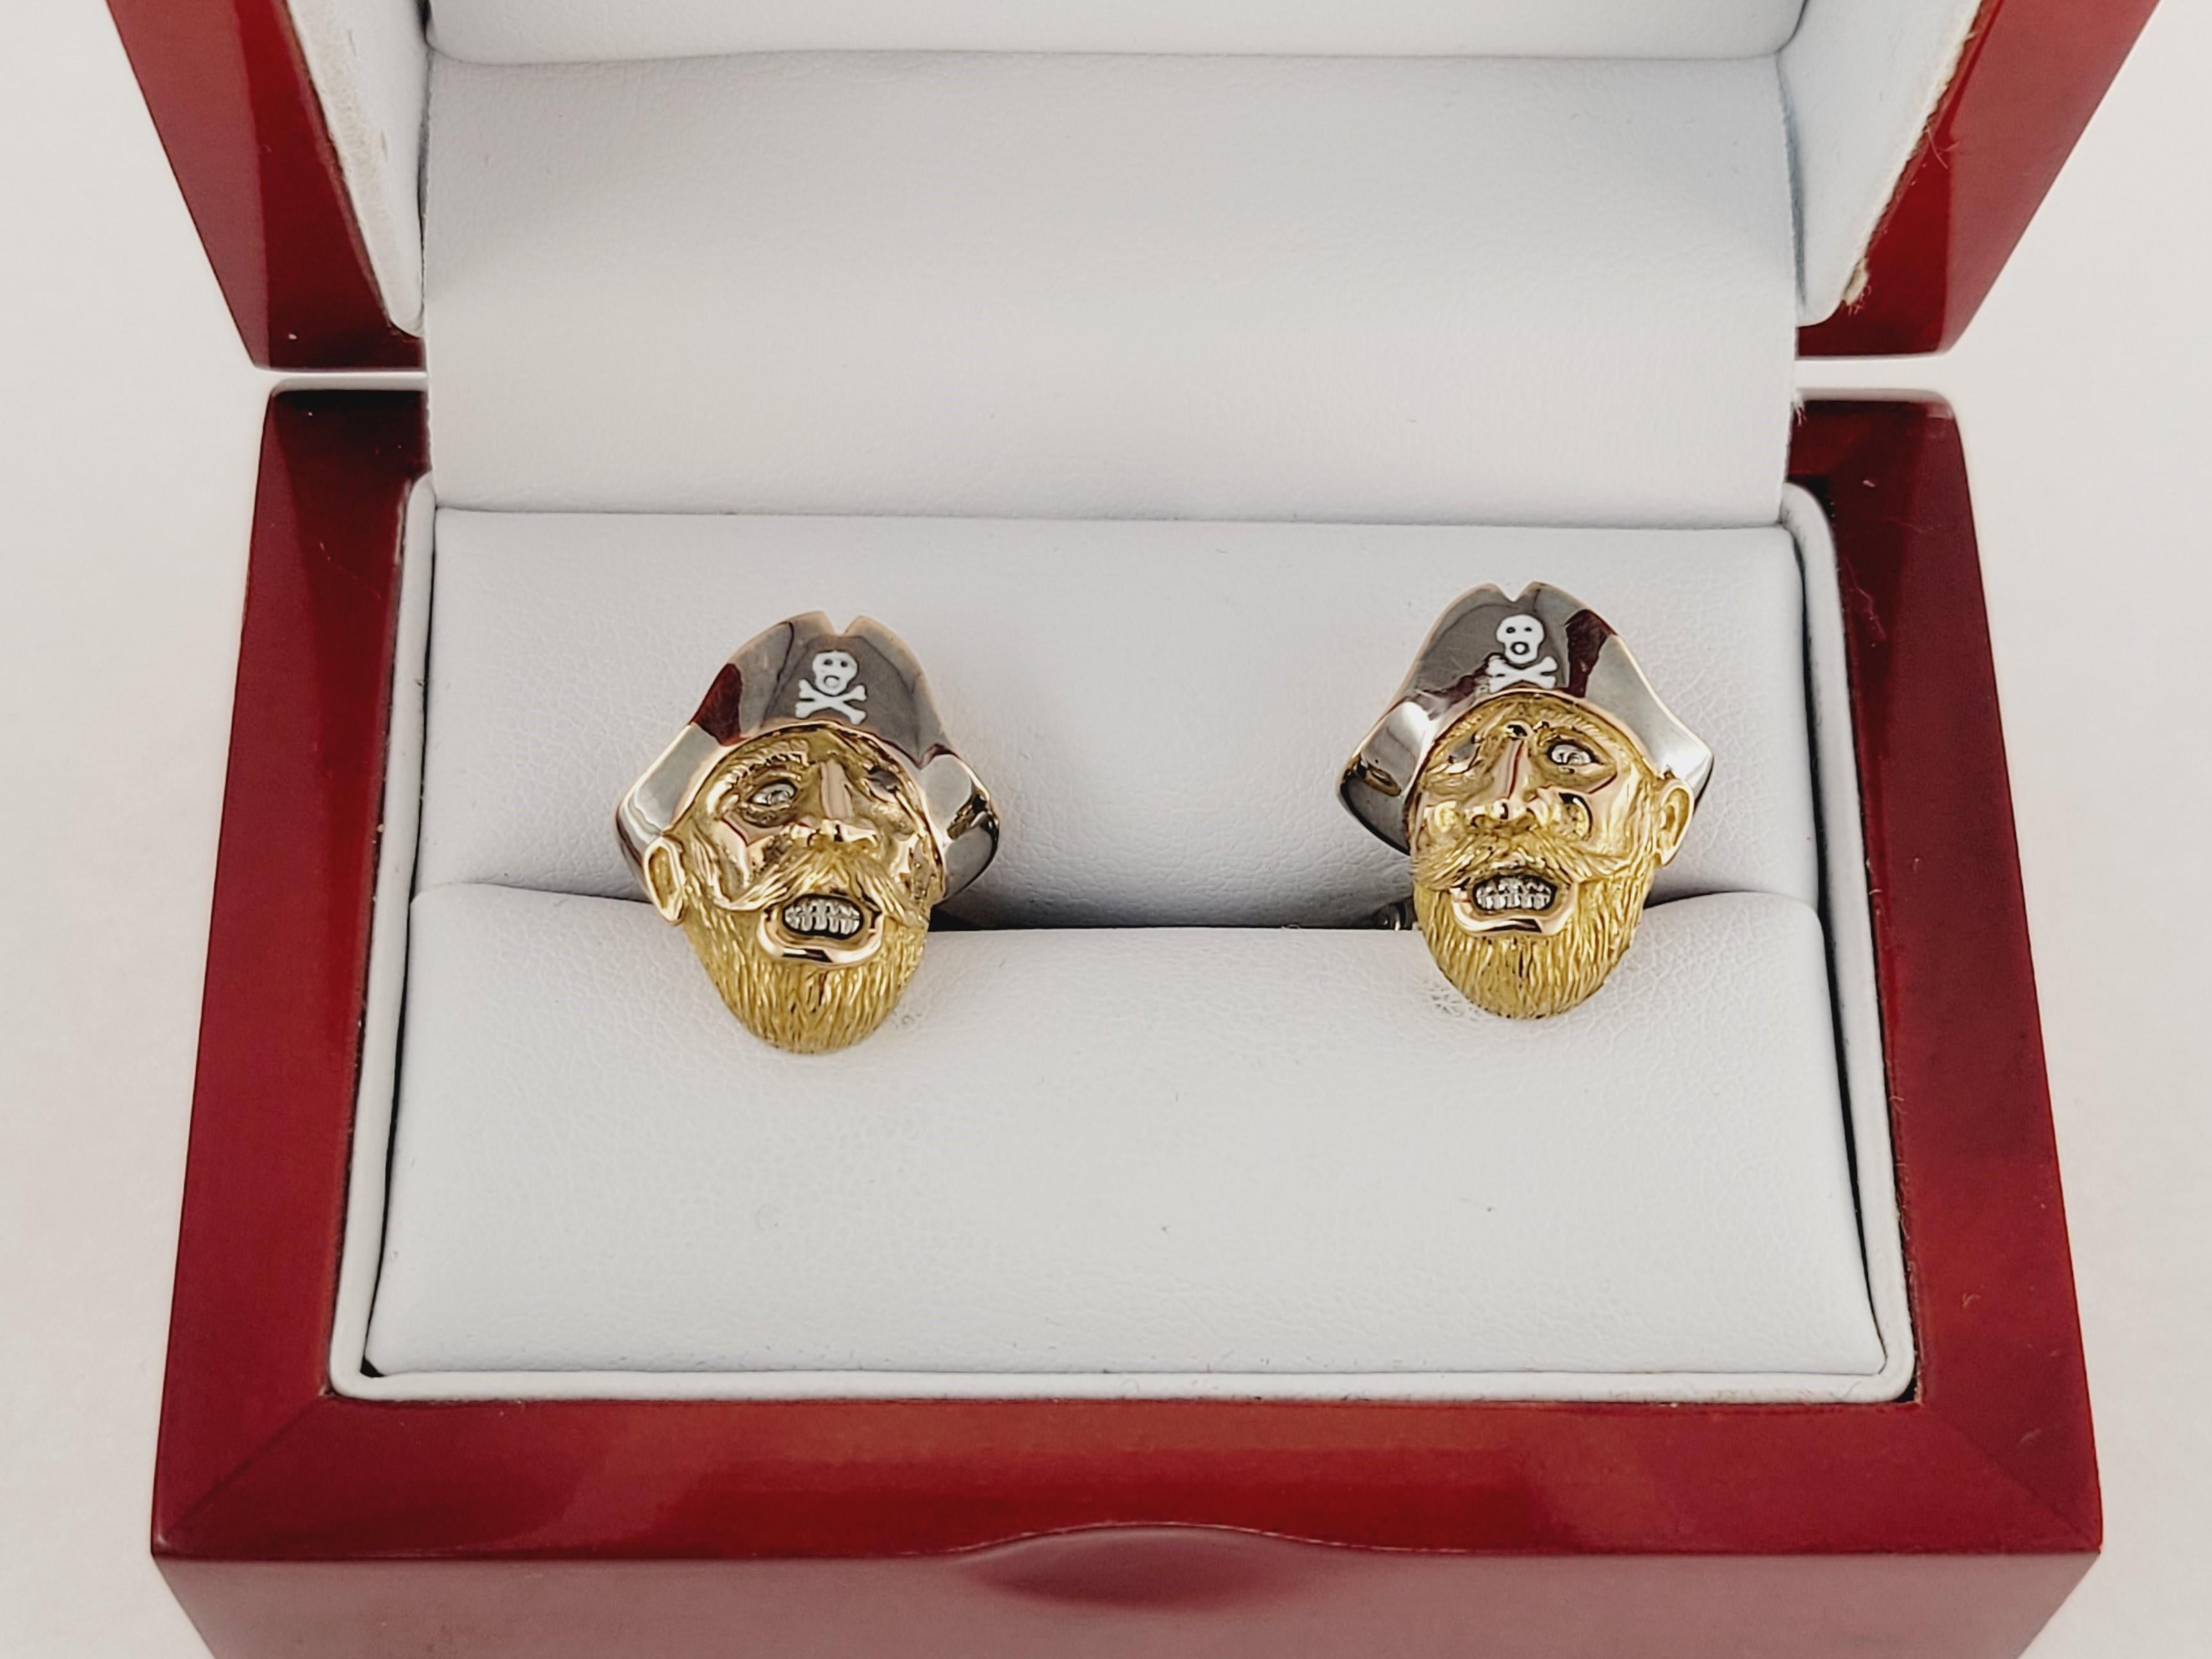 Custom made Pirates Cufflinks
Gender Men 
Condition Never worn
Material 18K Yellow Gold
Pirate dimension 18.7x16.2mm
Eyes & Teeth Platinum
Scull hot enamel 
Weight 19.2gr
Comes with box